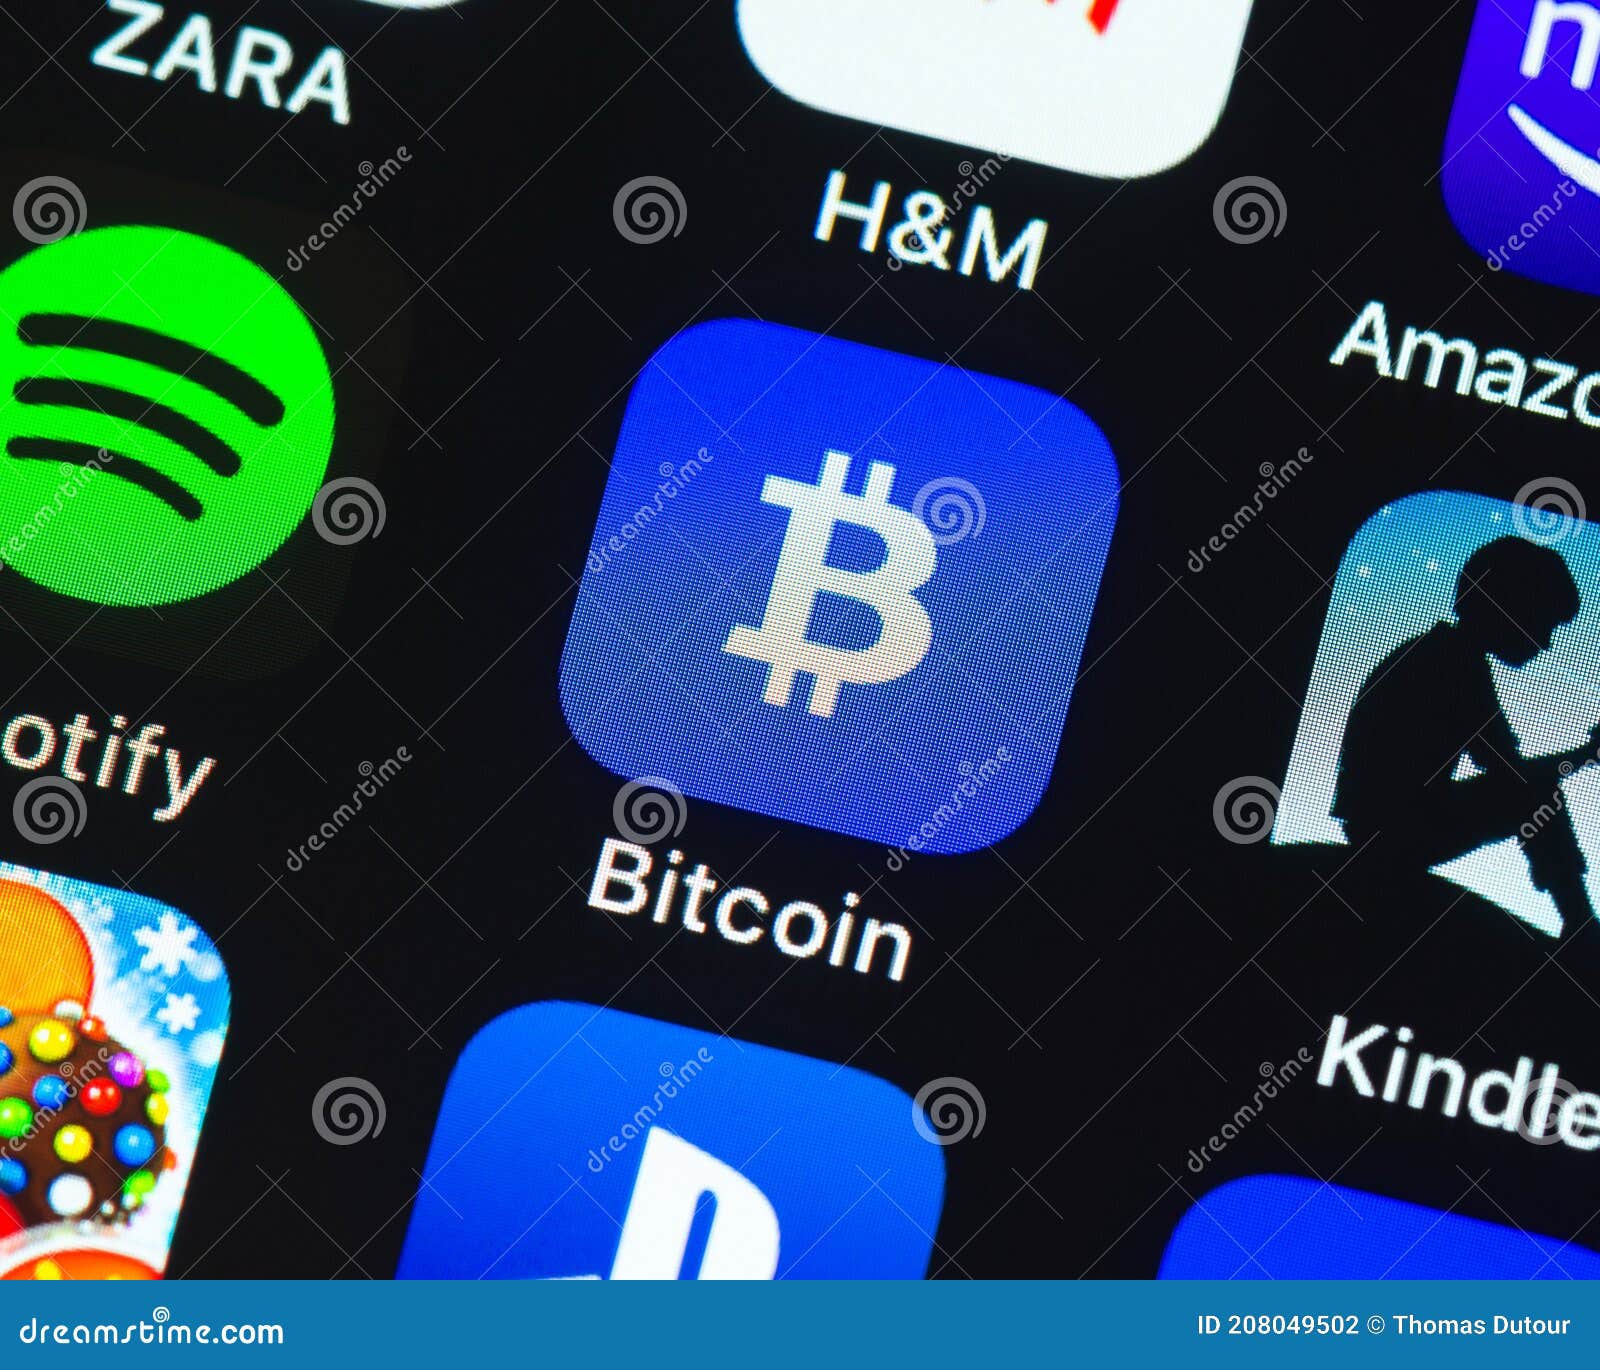 The Best Bitcoin iPhone apps for 